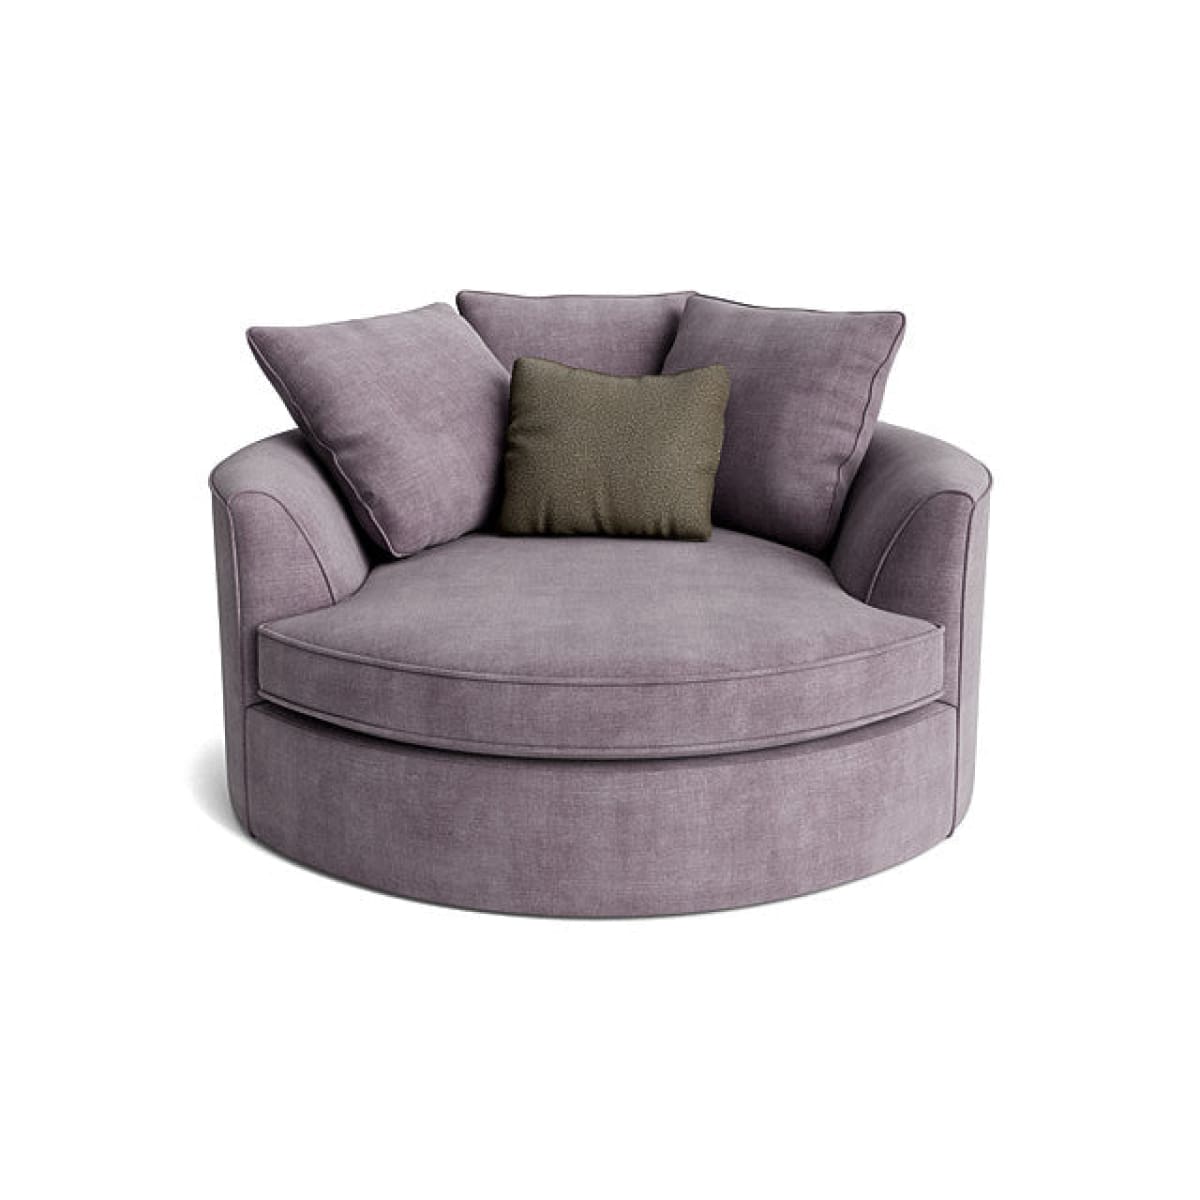 Nest Accent Chair - Analogy Lilac